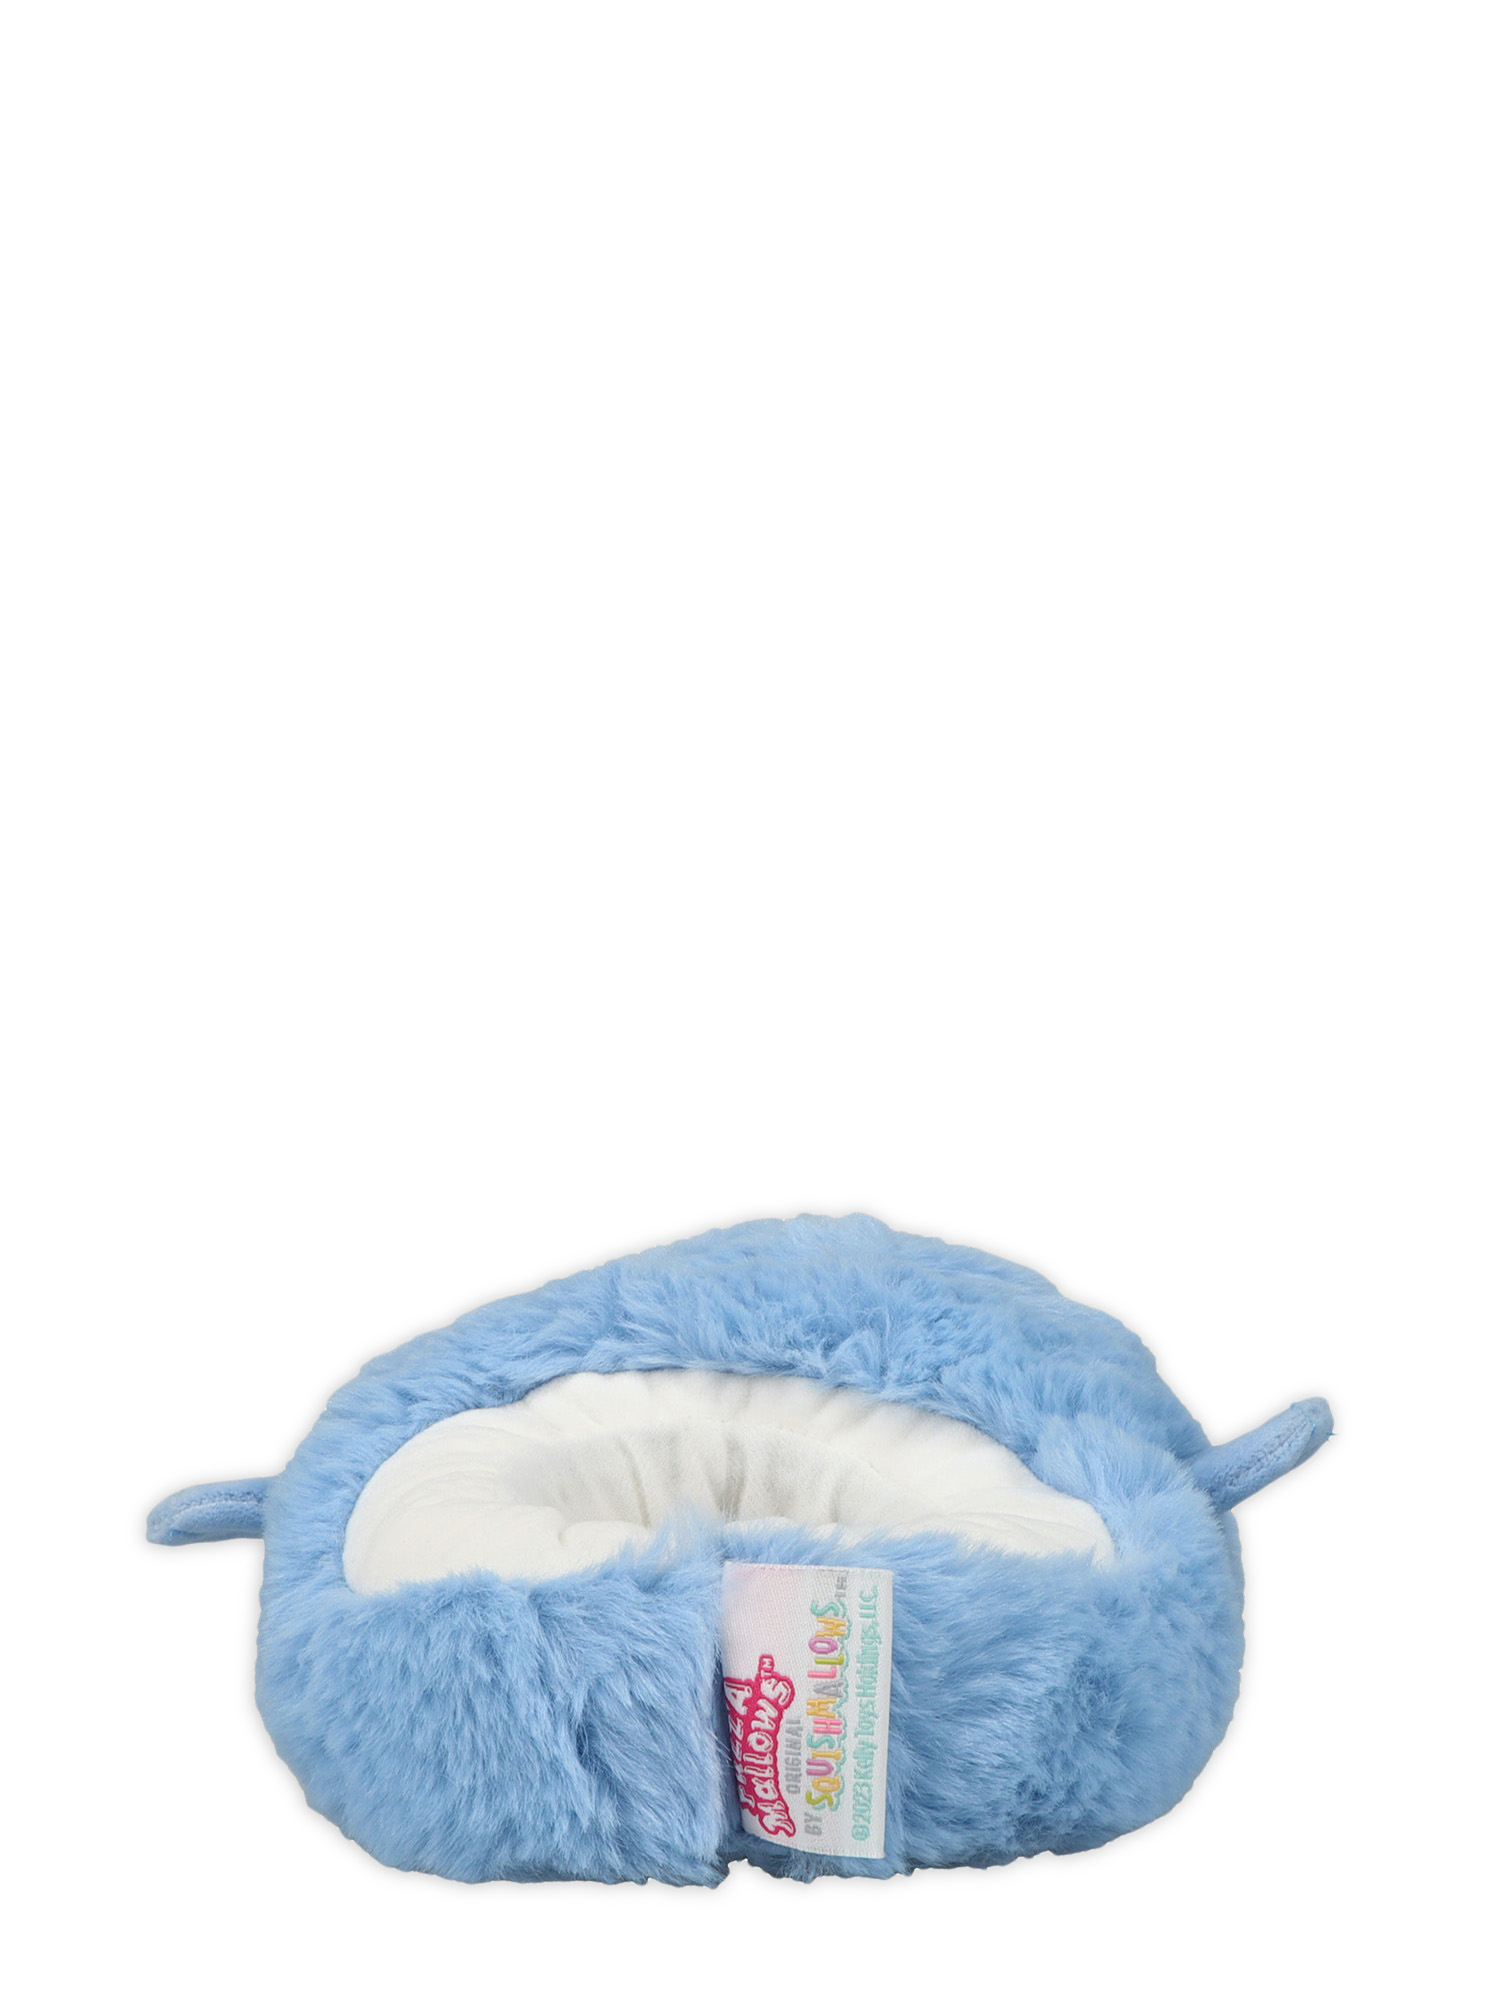 Squishmallows Toddler & Kids Harvey the Walrus Slippers - image 3 of 5